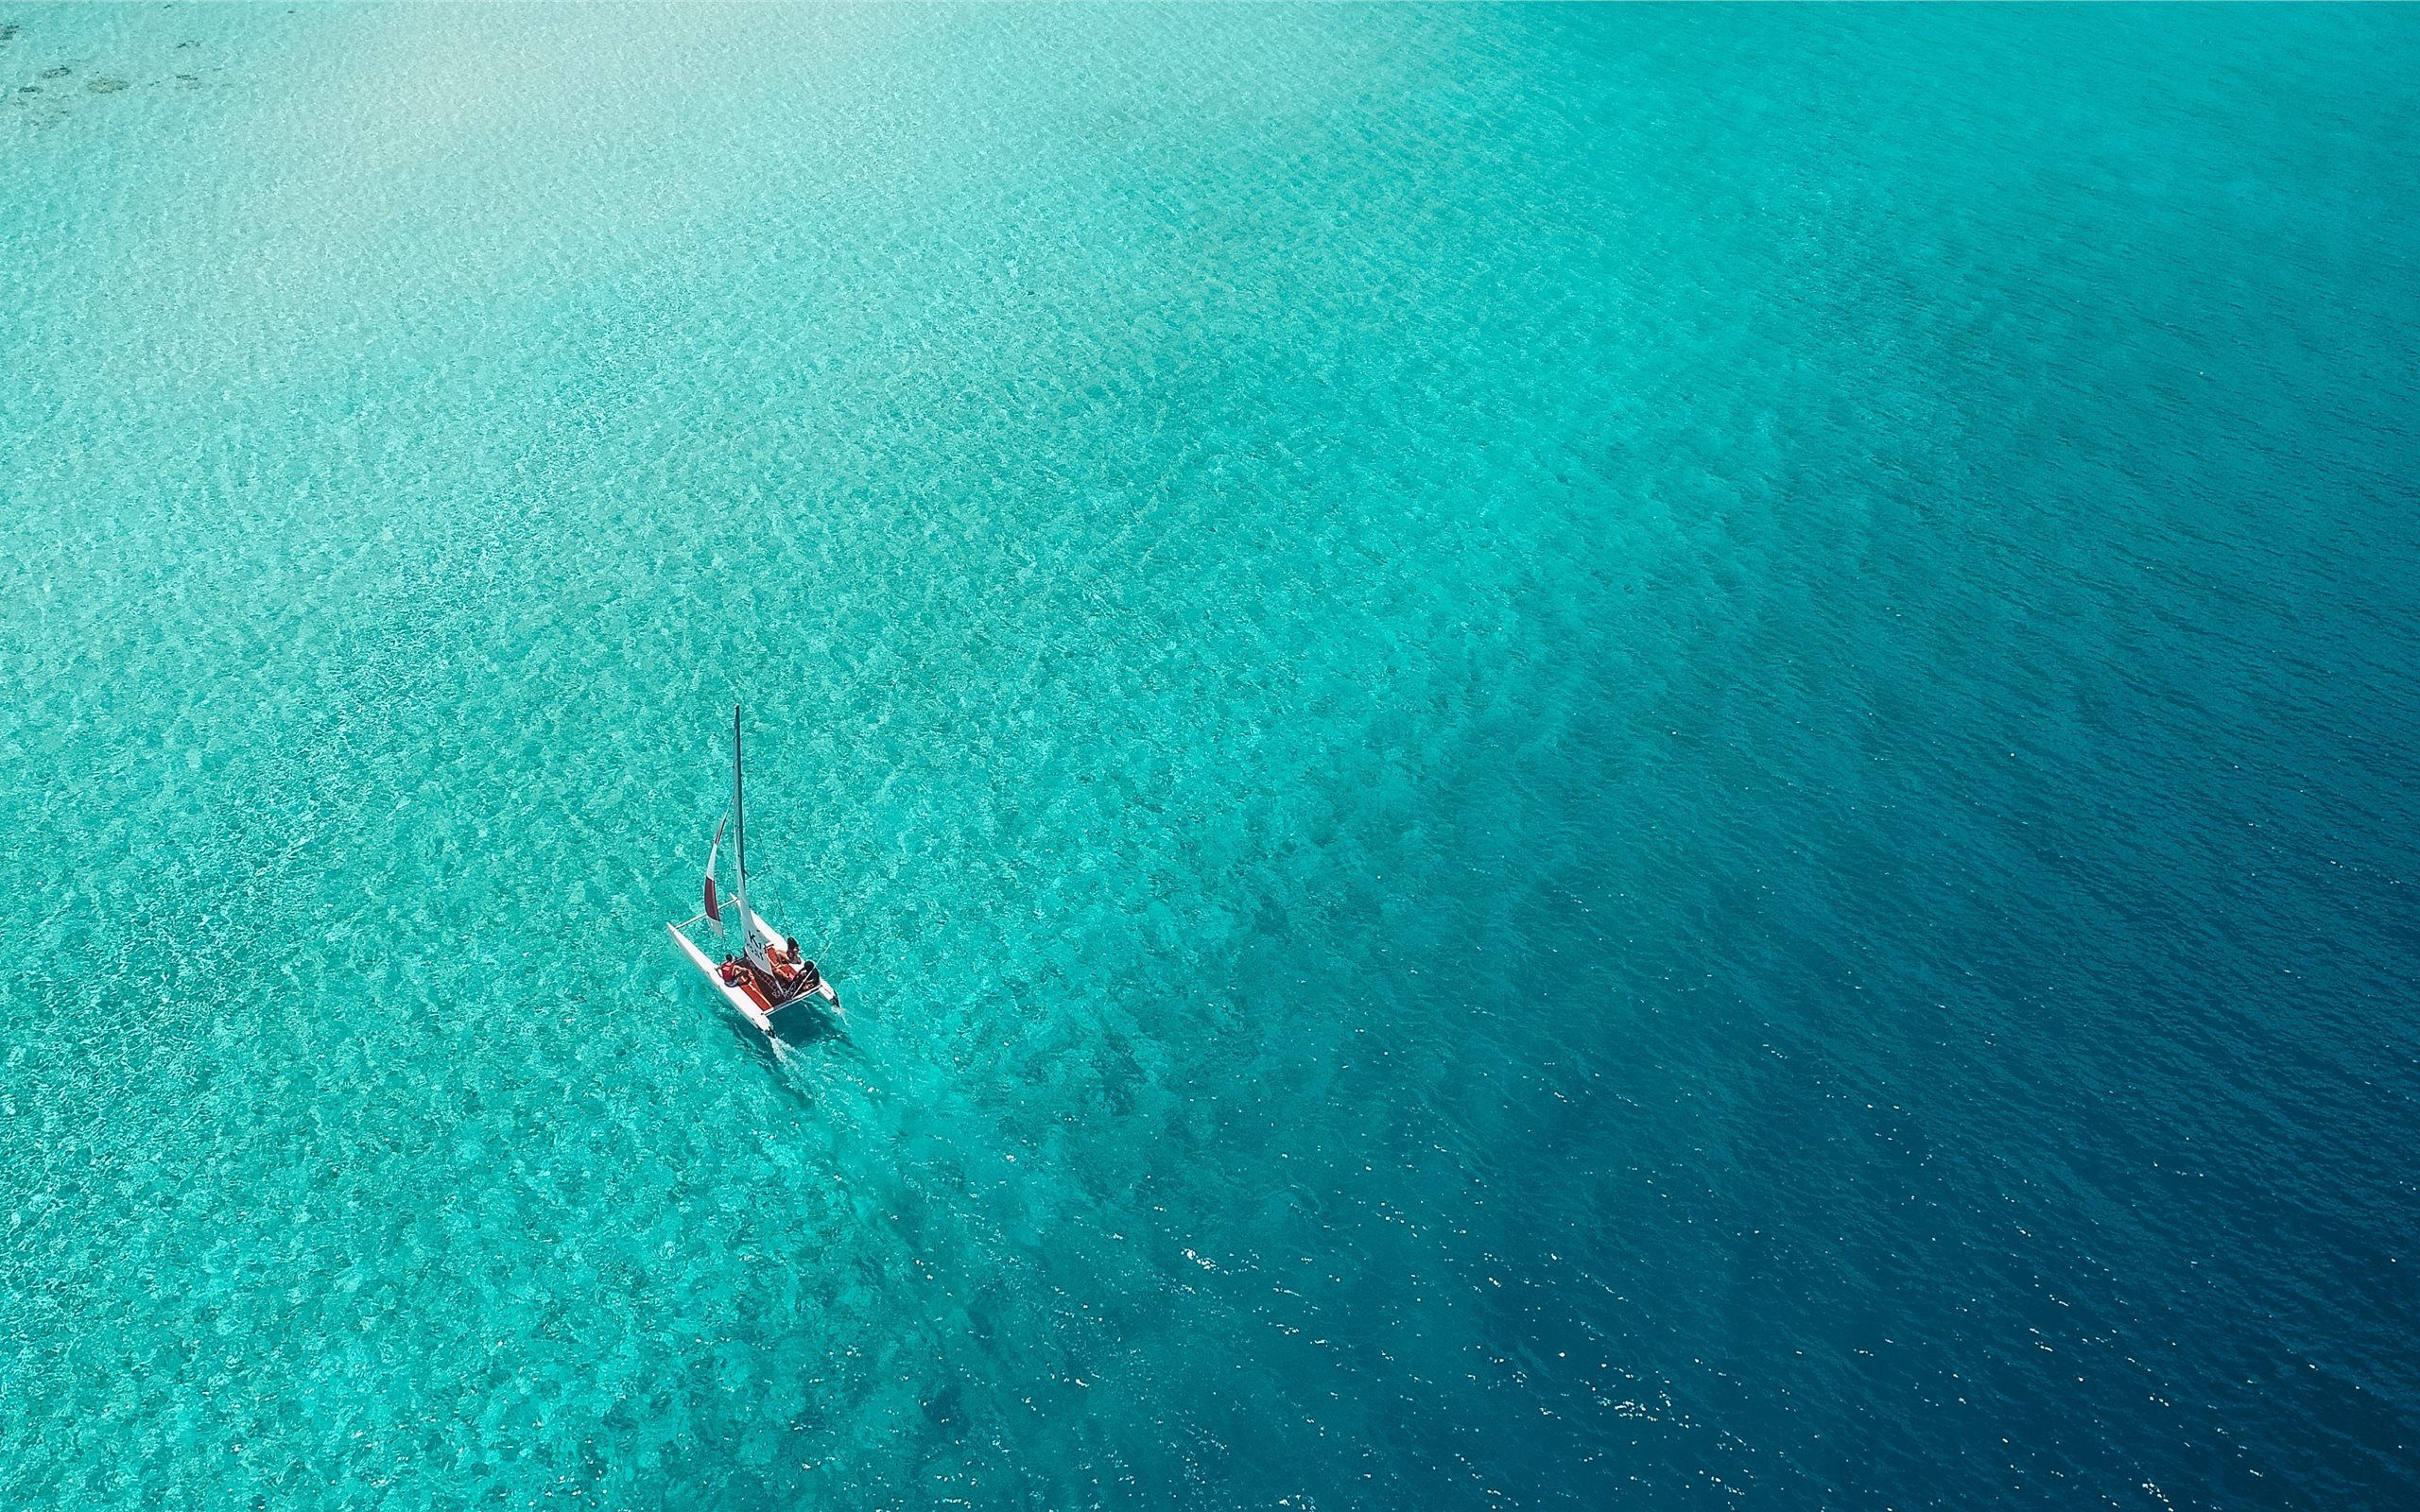 Catamaran: A sail or engine-powered boat with a double hull, Blue-water cruising. 2560x1600 HD Wallpaper.